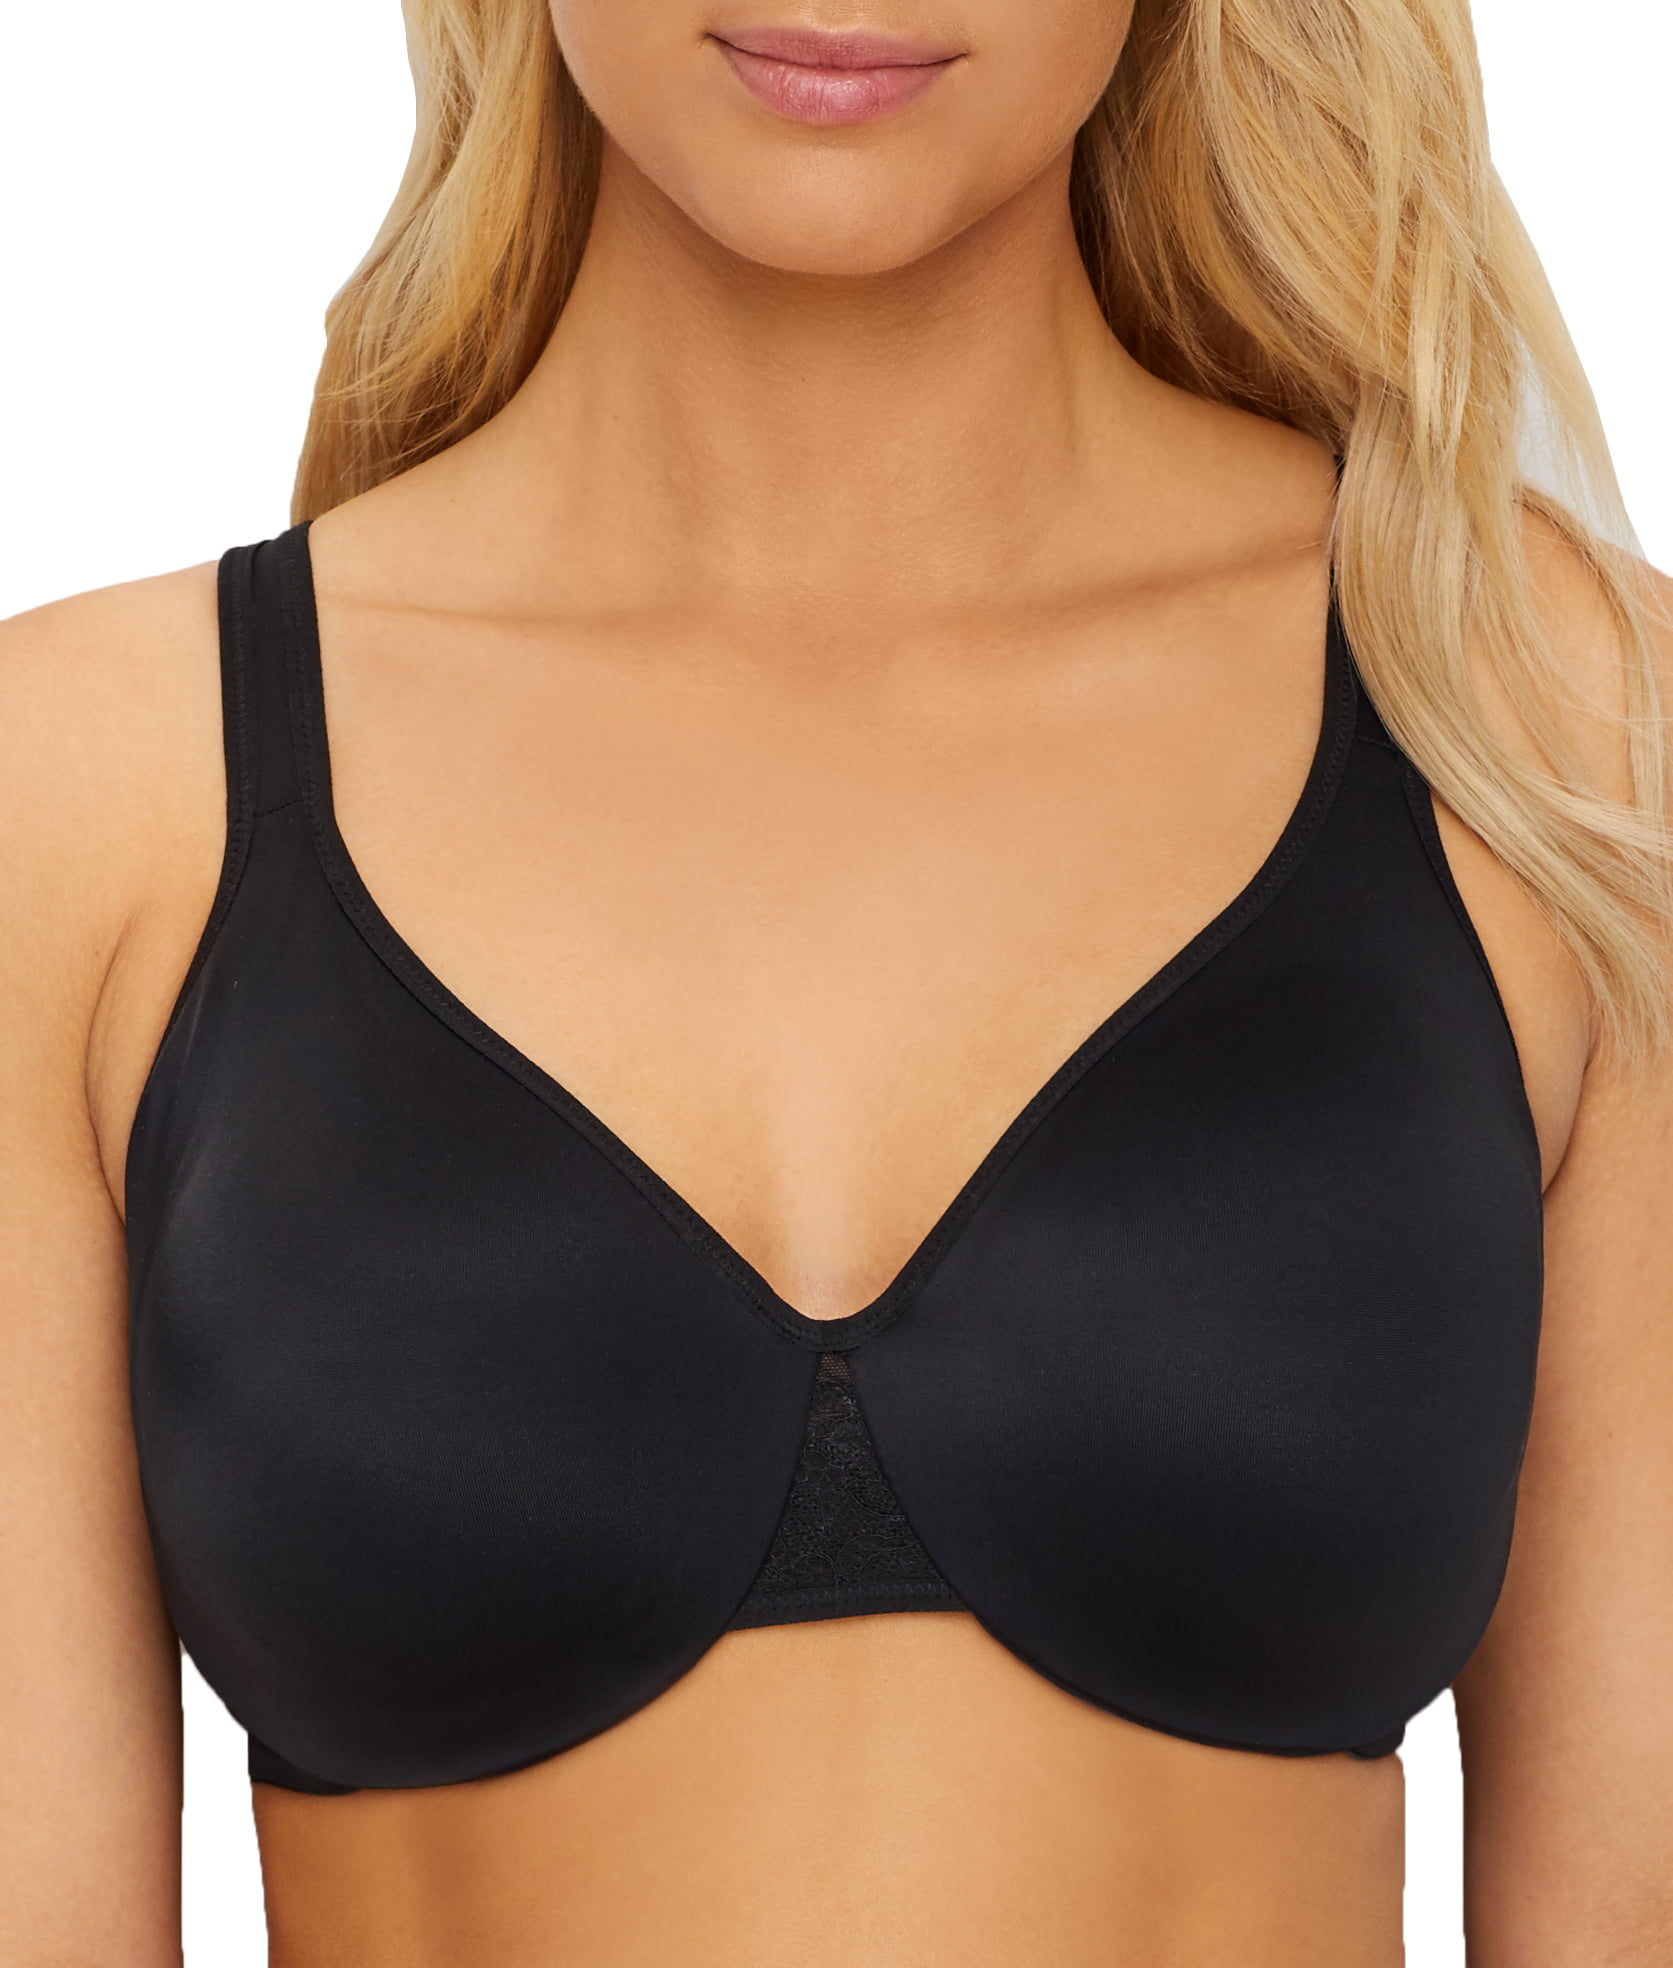 Olga Womens Signature Support Minimizer Bra Style-GH2141A 